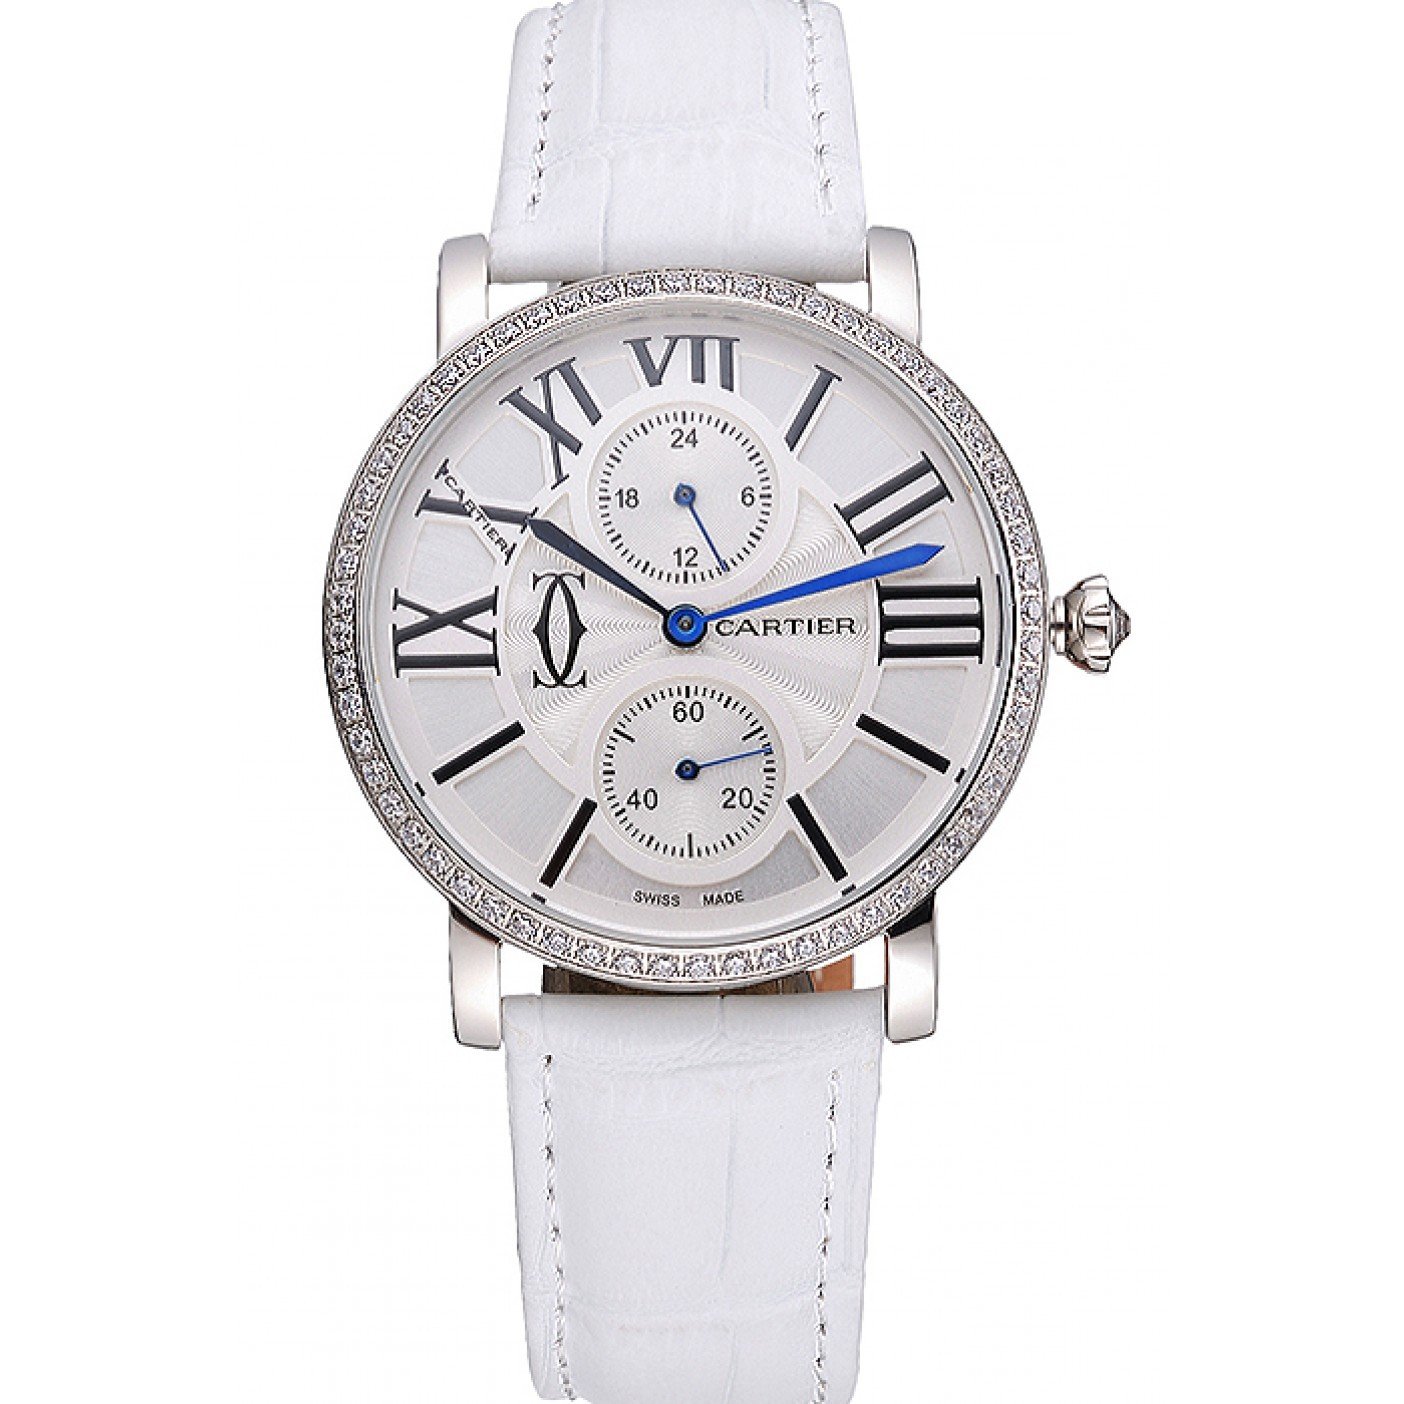 Cartier Ronde Second Time Zone White Dial Stainless Steel Case With Diamonds White Leather Strap 622803